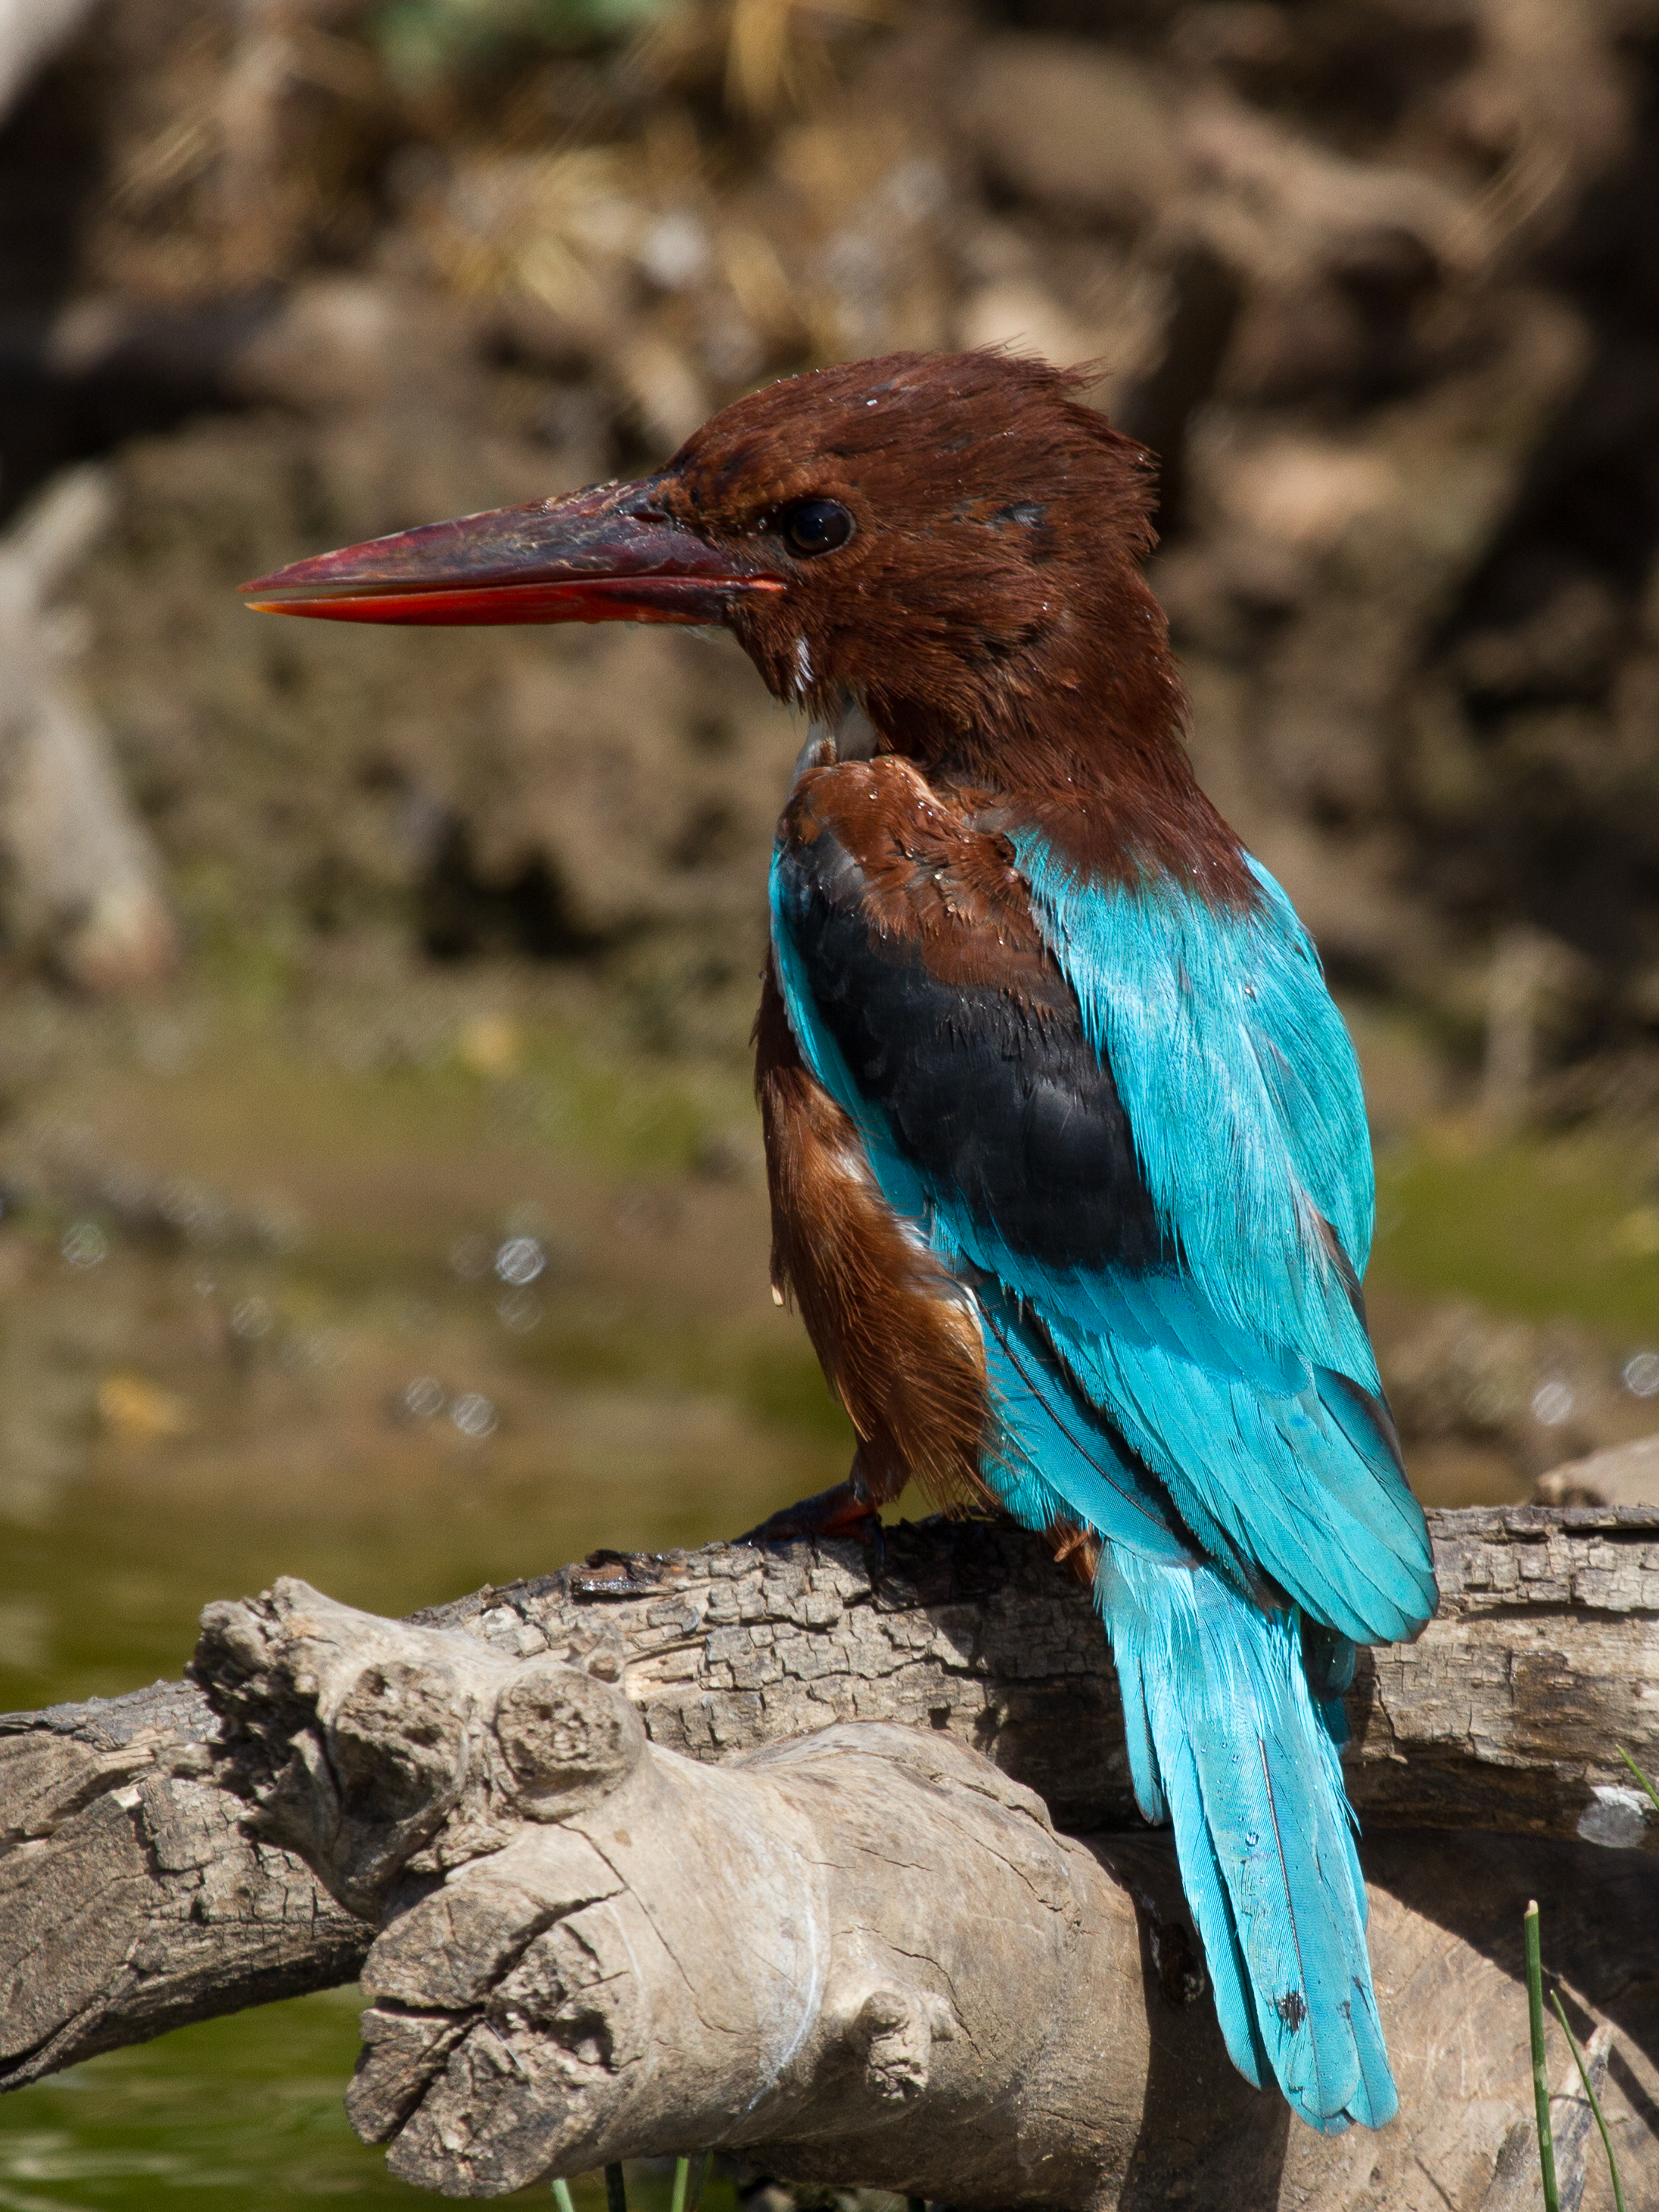 White-throated kingfisher from behind